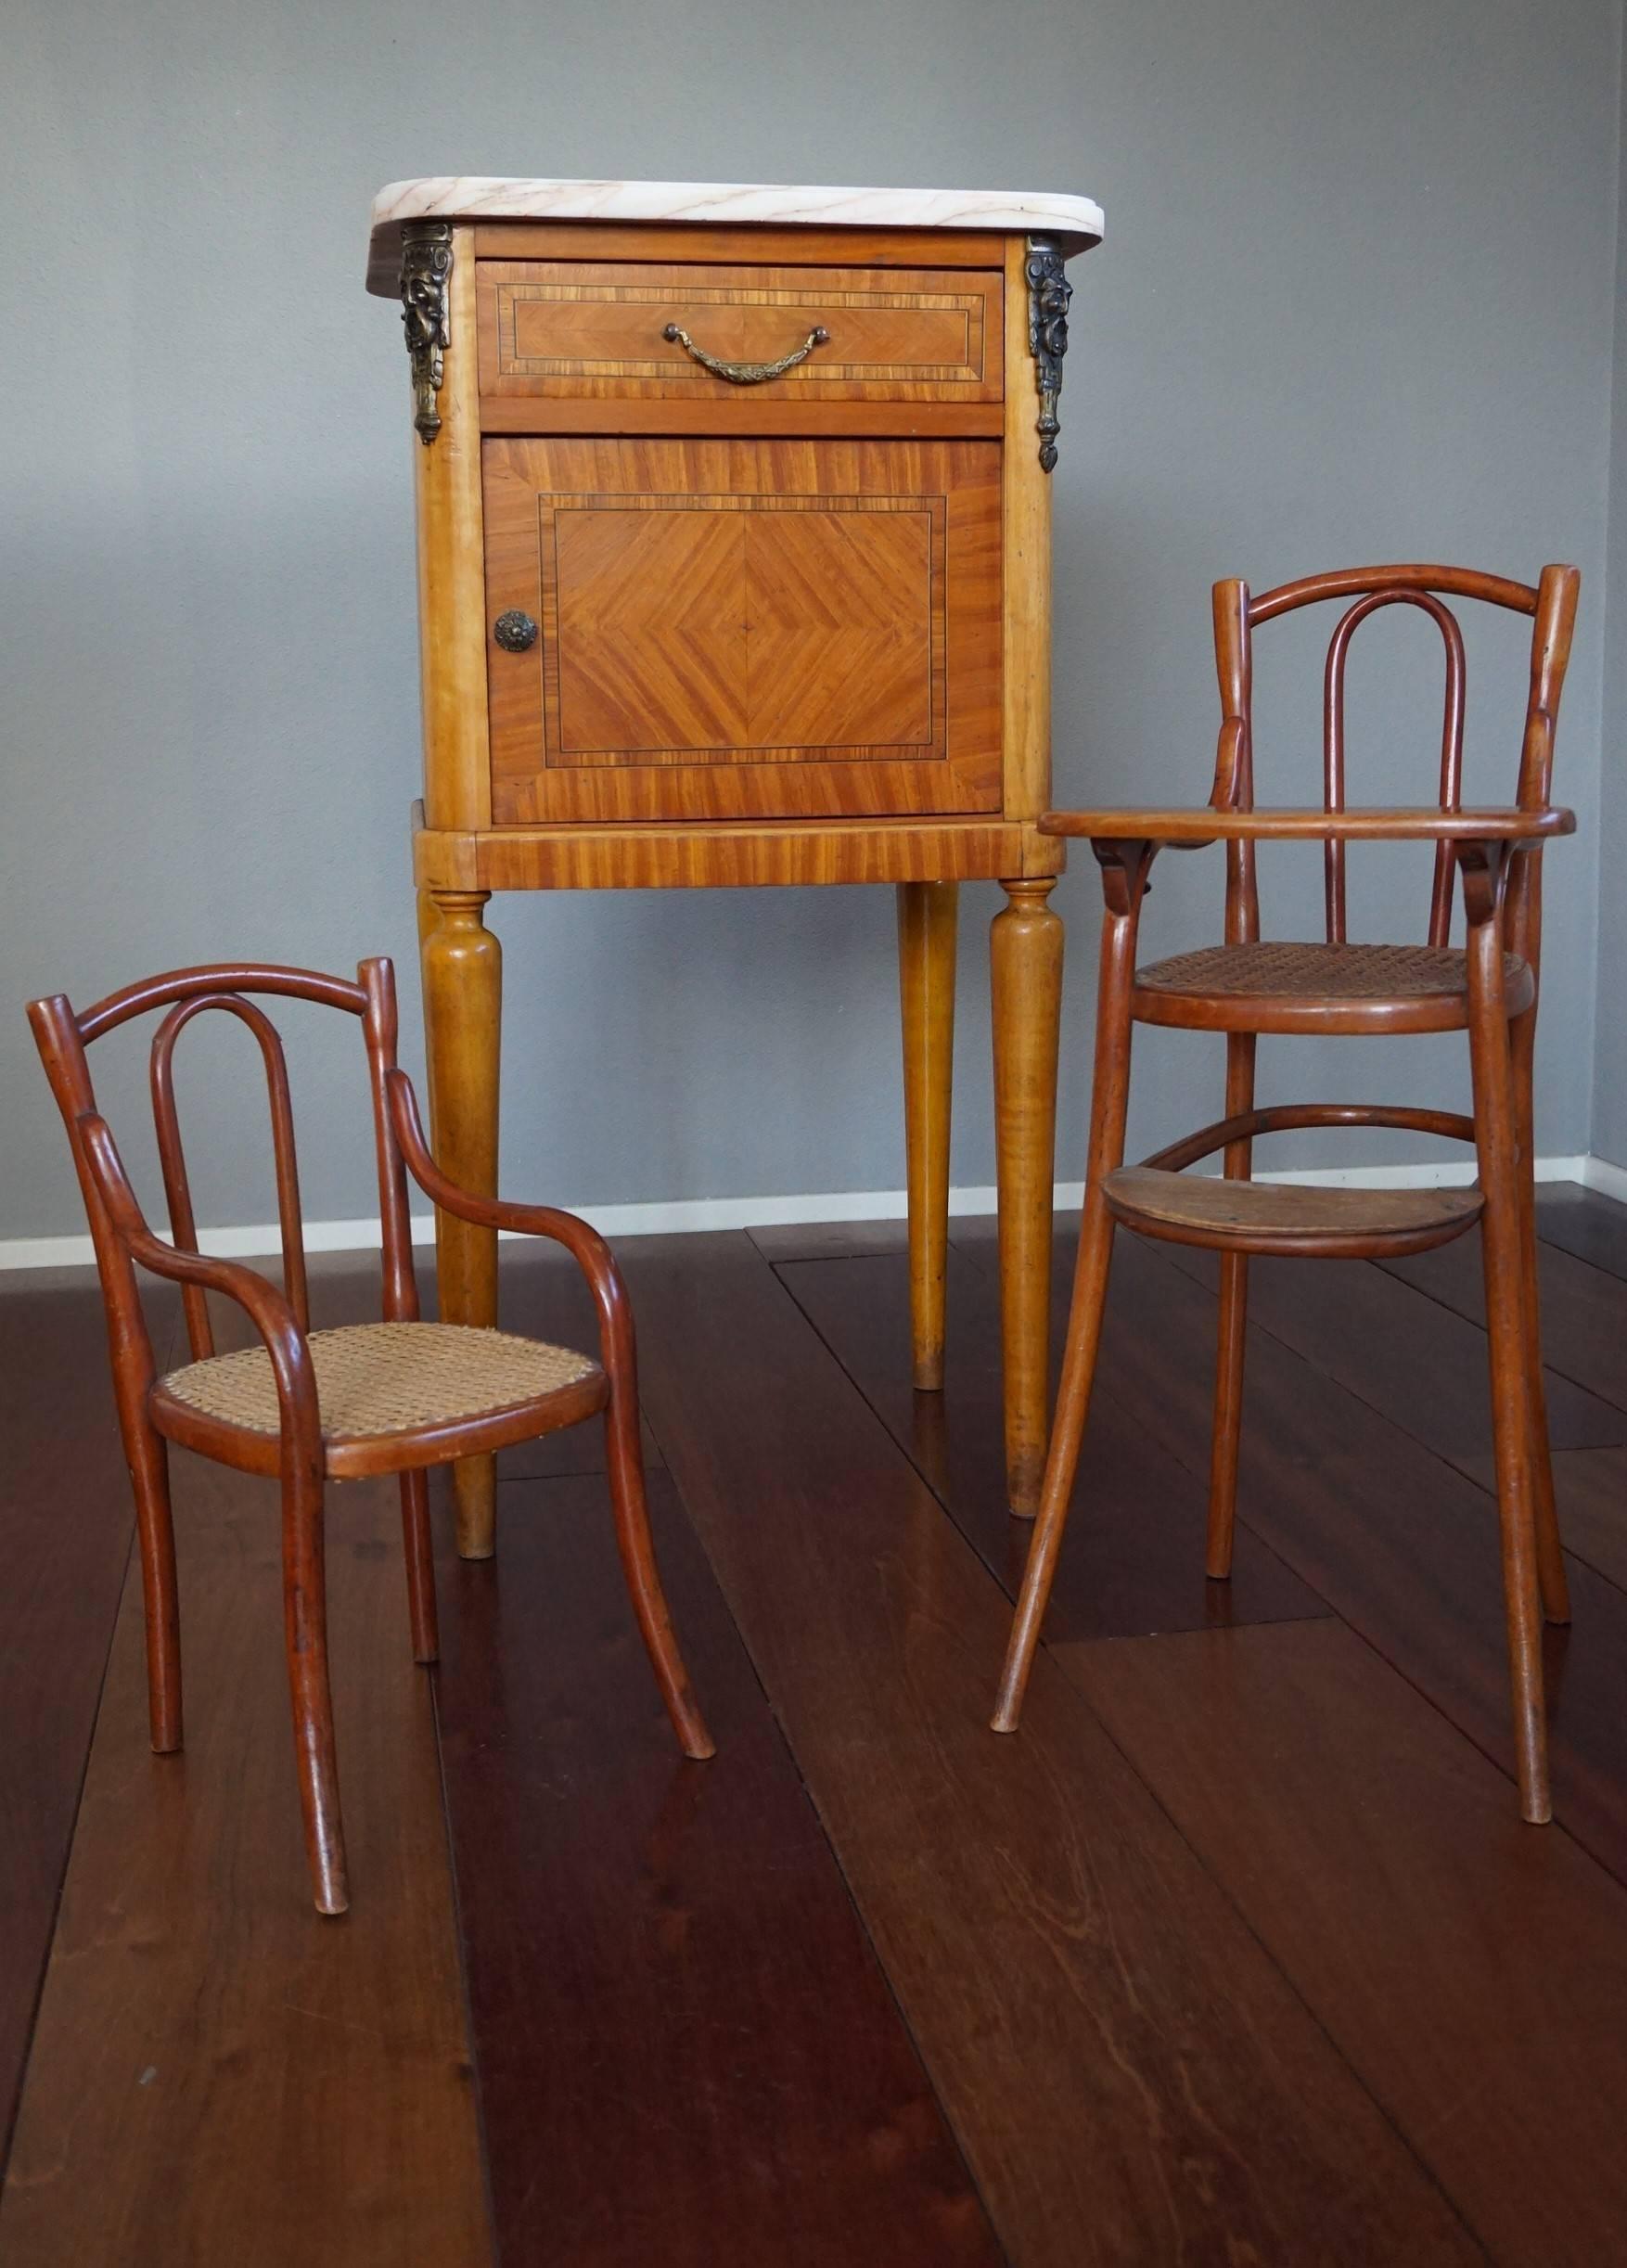 Rare and great condition Thonet doll chairs.

For the collectors of the rarest of Thonet pieces we are proud to offer this finest pair of early 20th century doll chairs. In the Thonet catalogue of 1904 these chairs are mentioned as 'Fauteuil 2' and